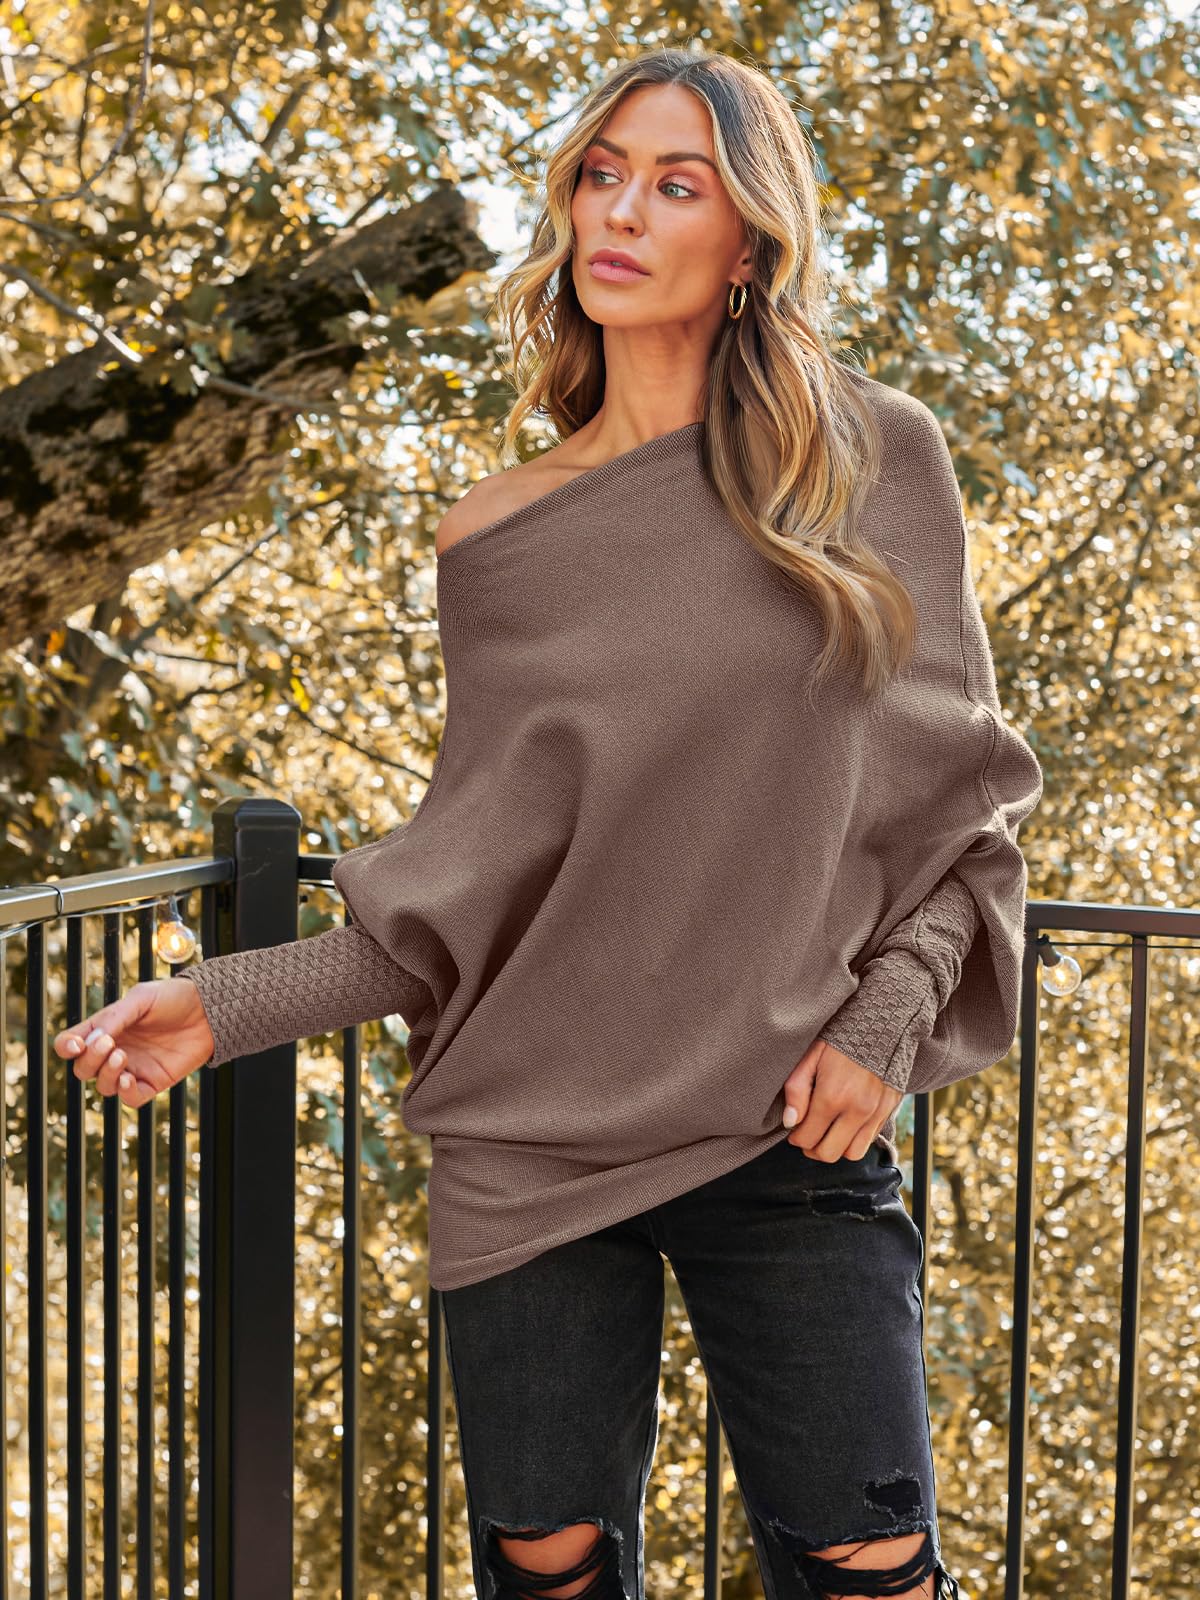 Womens Off The Shoulder Tunic Sweater